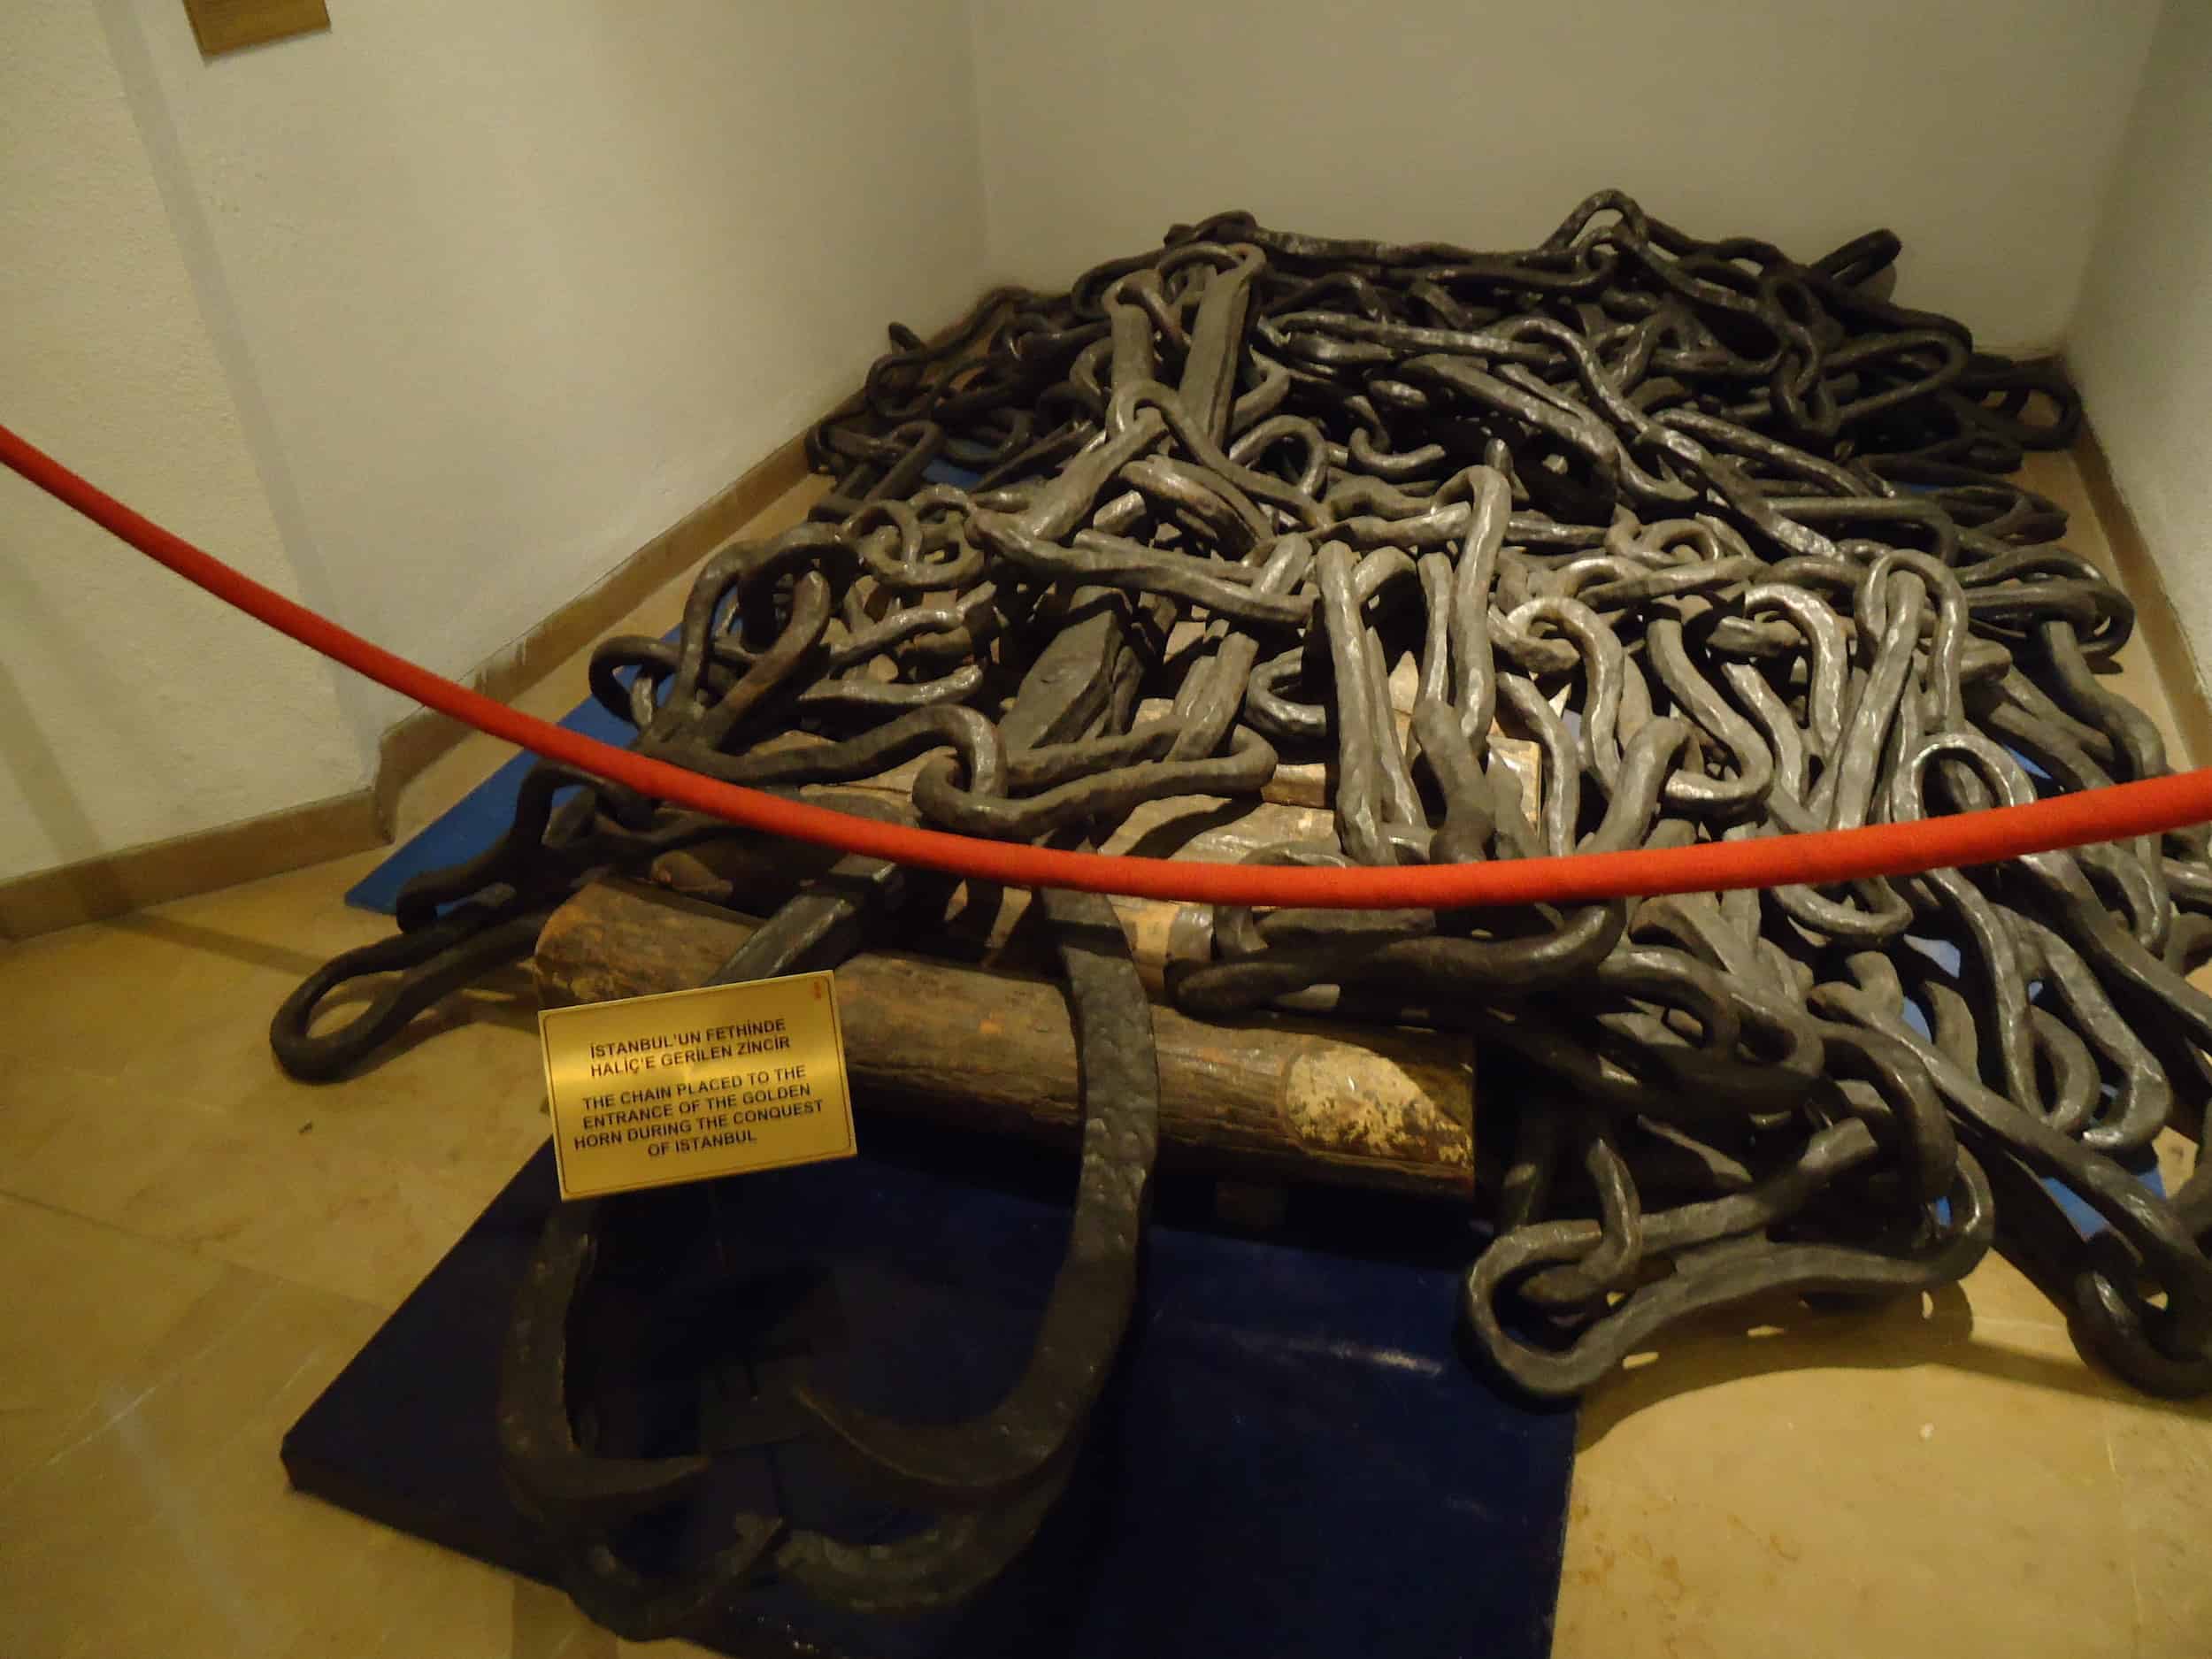 Byzantine chain exhibit in February 2012 at the Harbiye Military Museum in Istanbul, Turkey